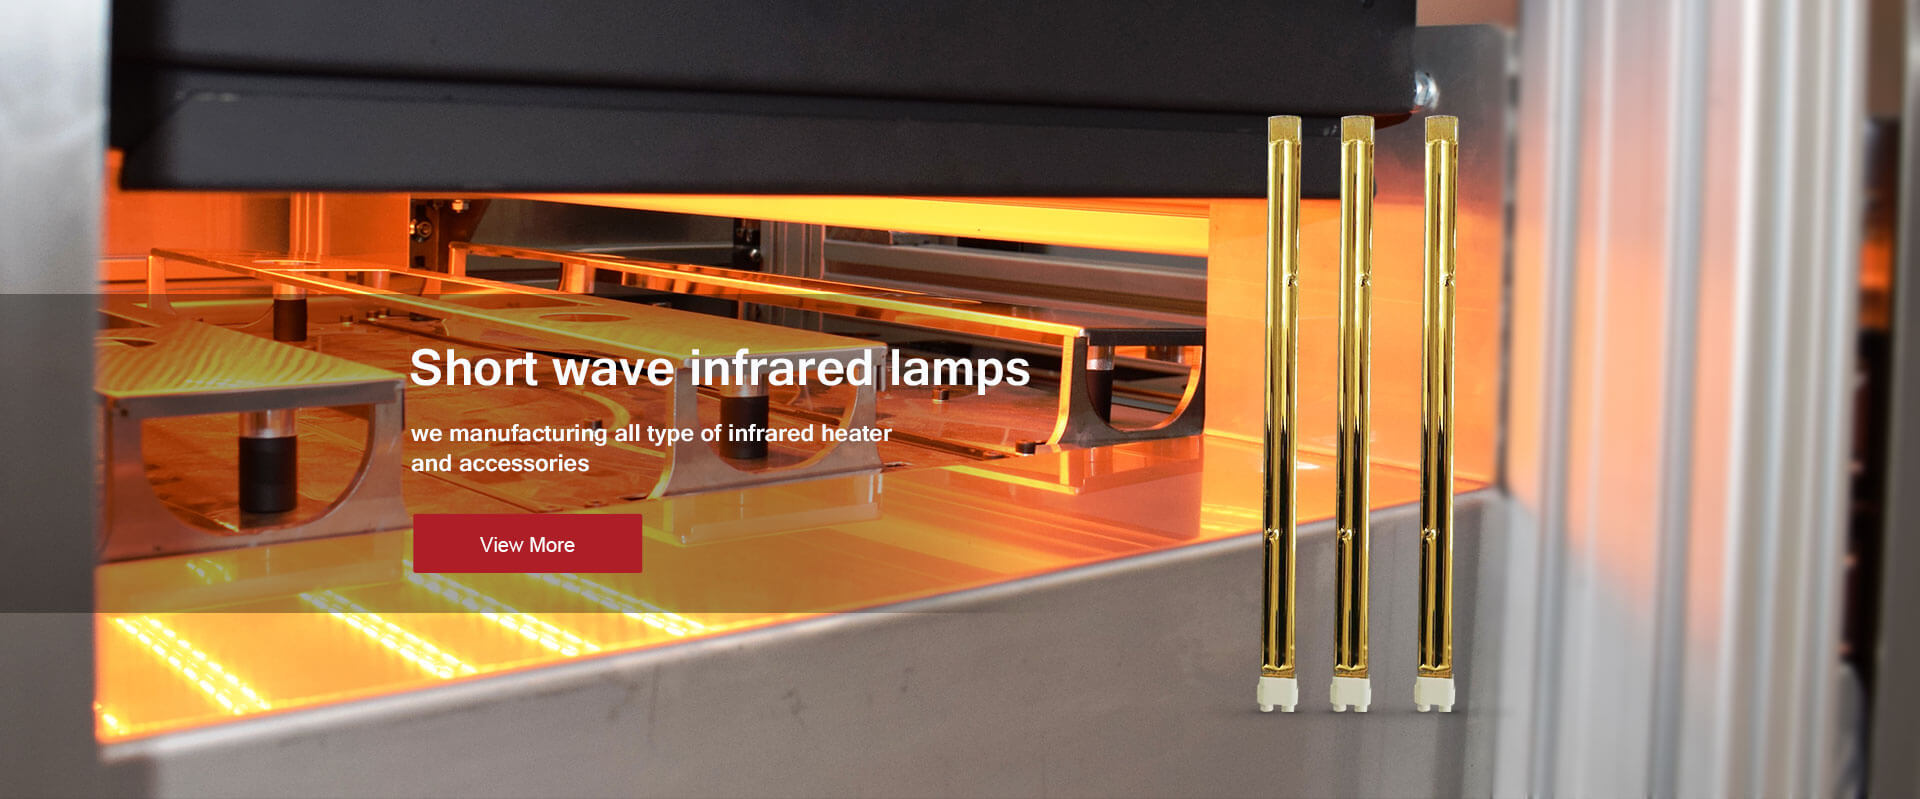 We manufacturing all type of infrared heater and accessories